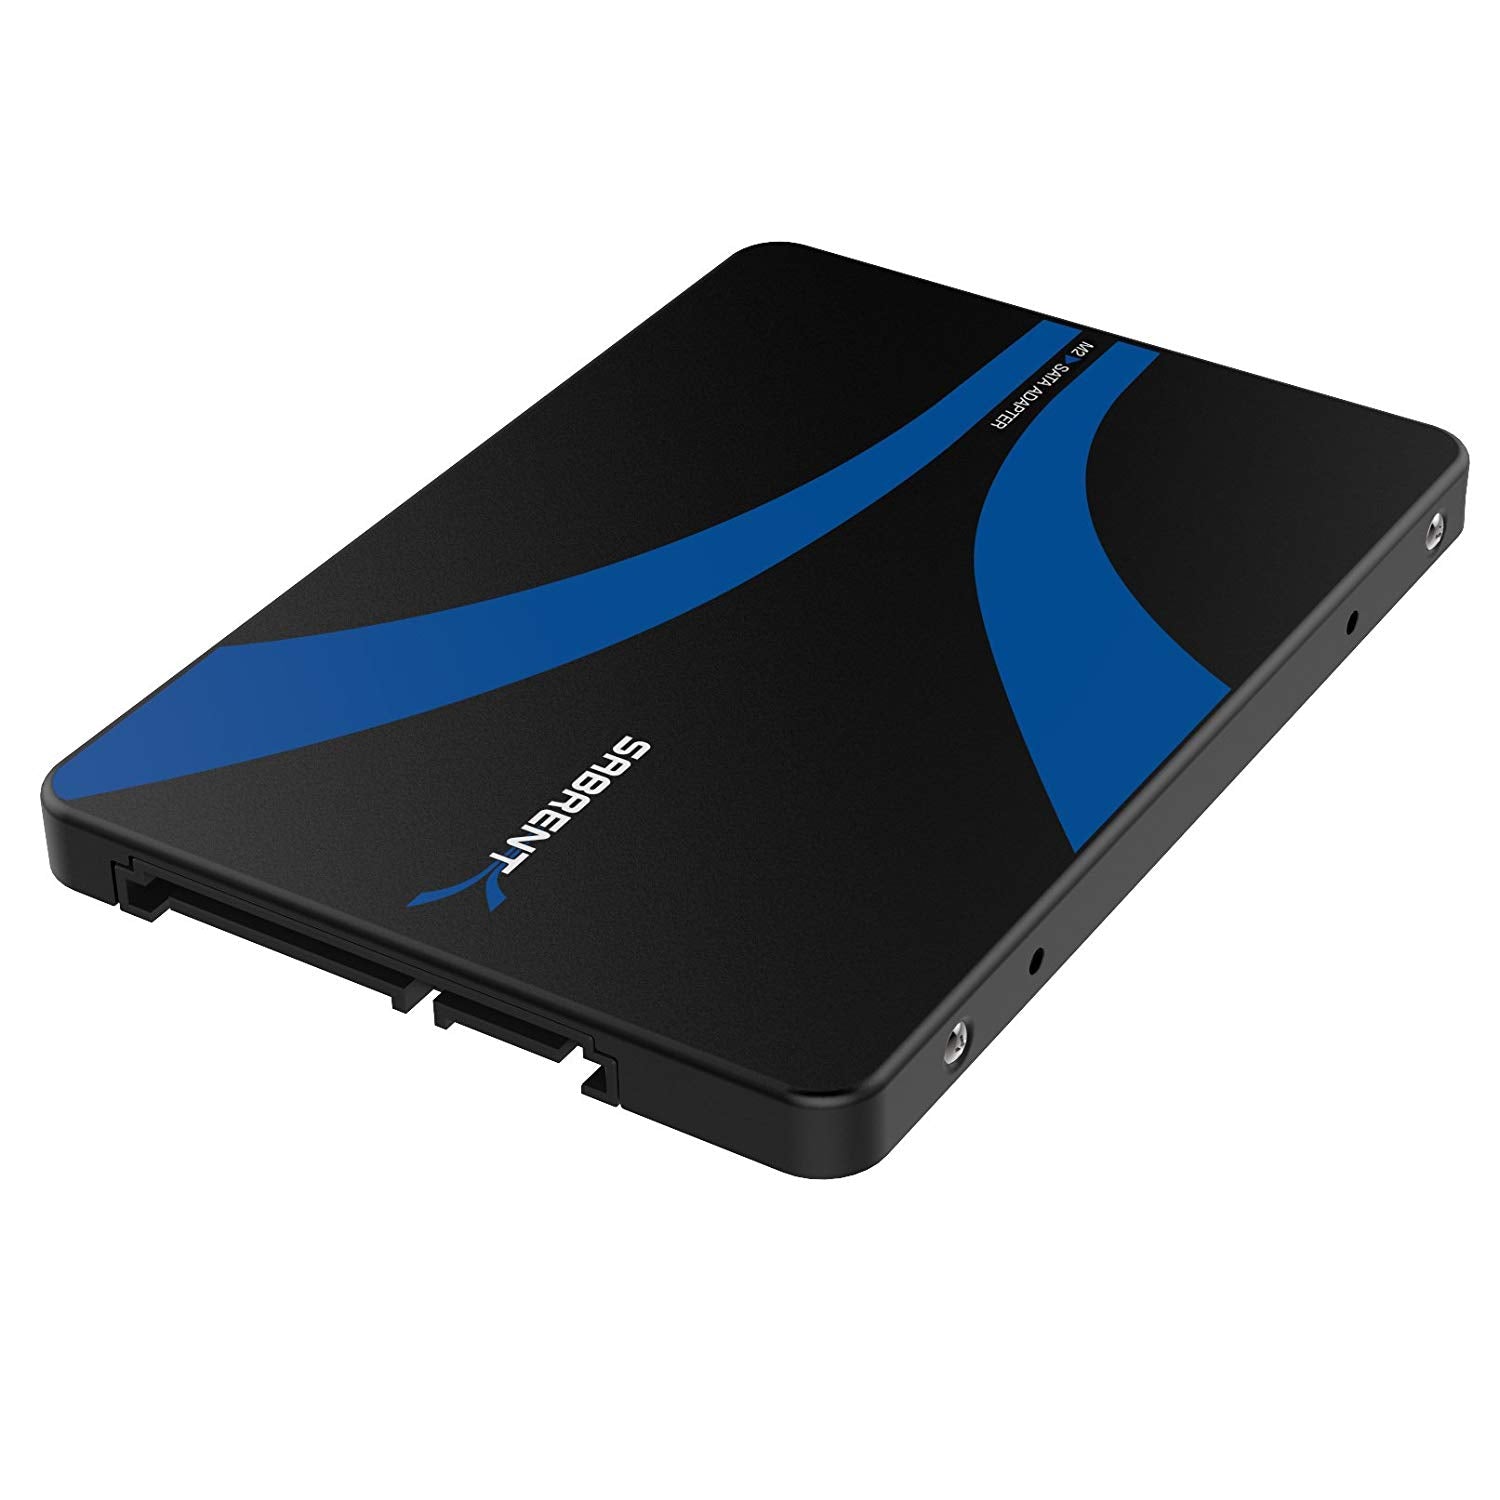 Boitier externe We SSD M.2 S-ATA - WE